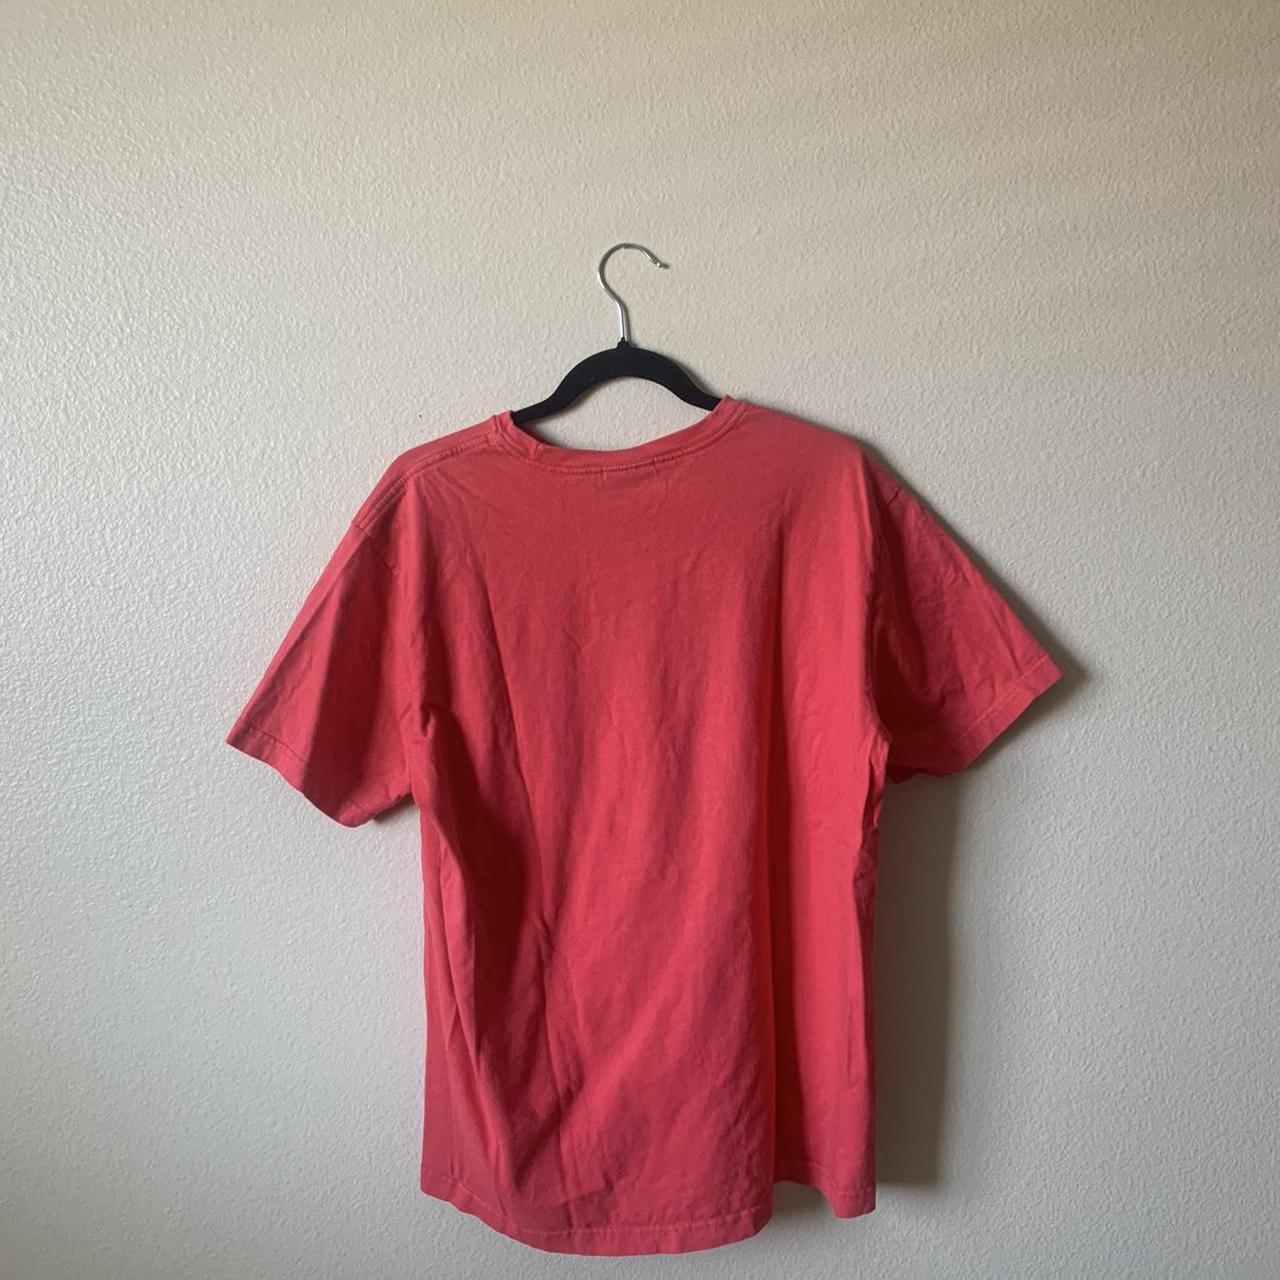 Nautica mens red graphic T-shirt. Size M , Width 